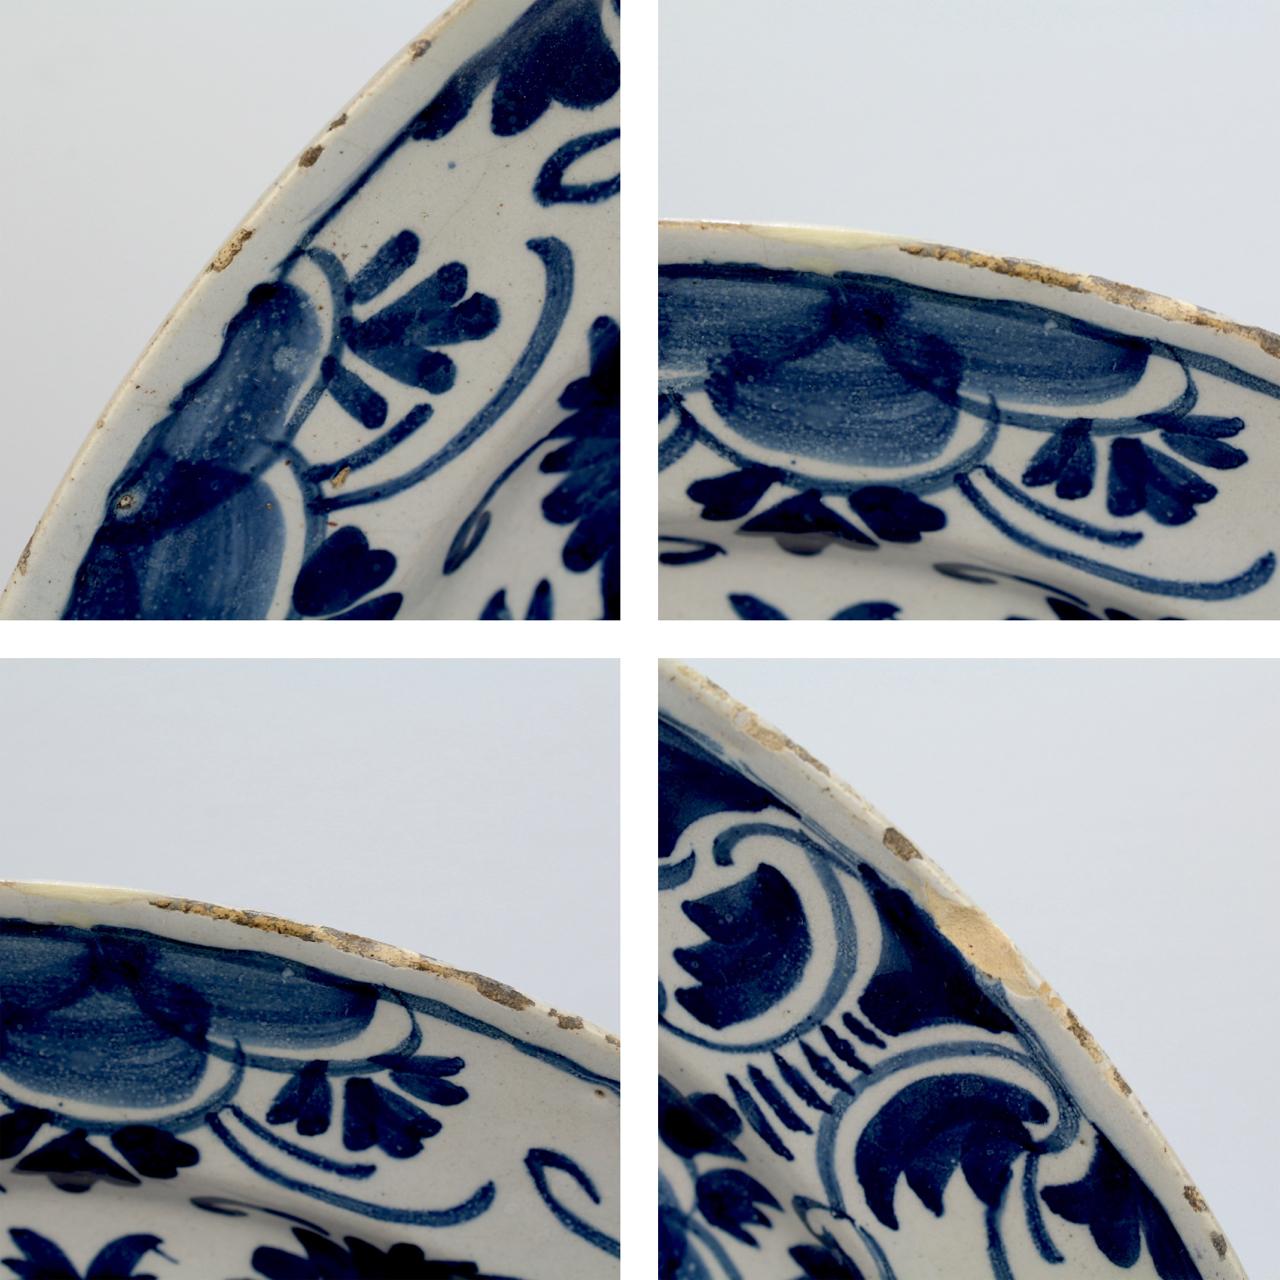 Dutch Pair of Large Matched 18th Century Blue and White Delft Chargers or Wall Plates